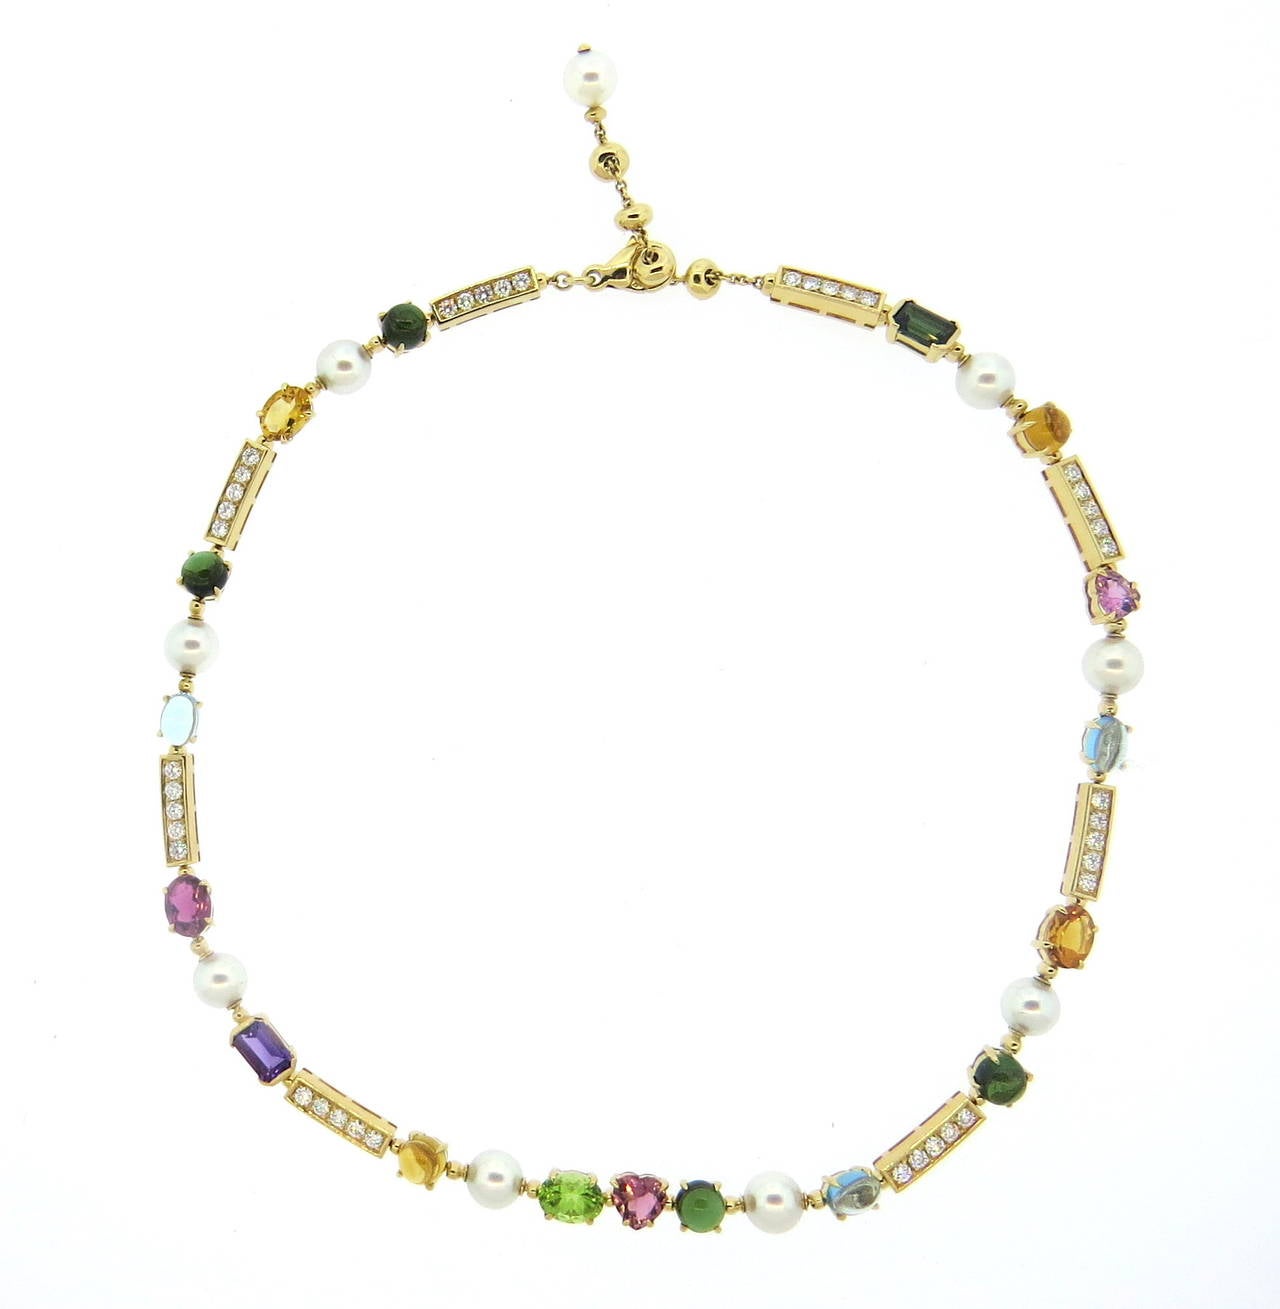 An 18k yellow gold necklace set with blue topaz, citrine, green and pink tourmaline, pearls (7.4mm) and diamonds (approx. 2cts).  The necklace can be worn at 14